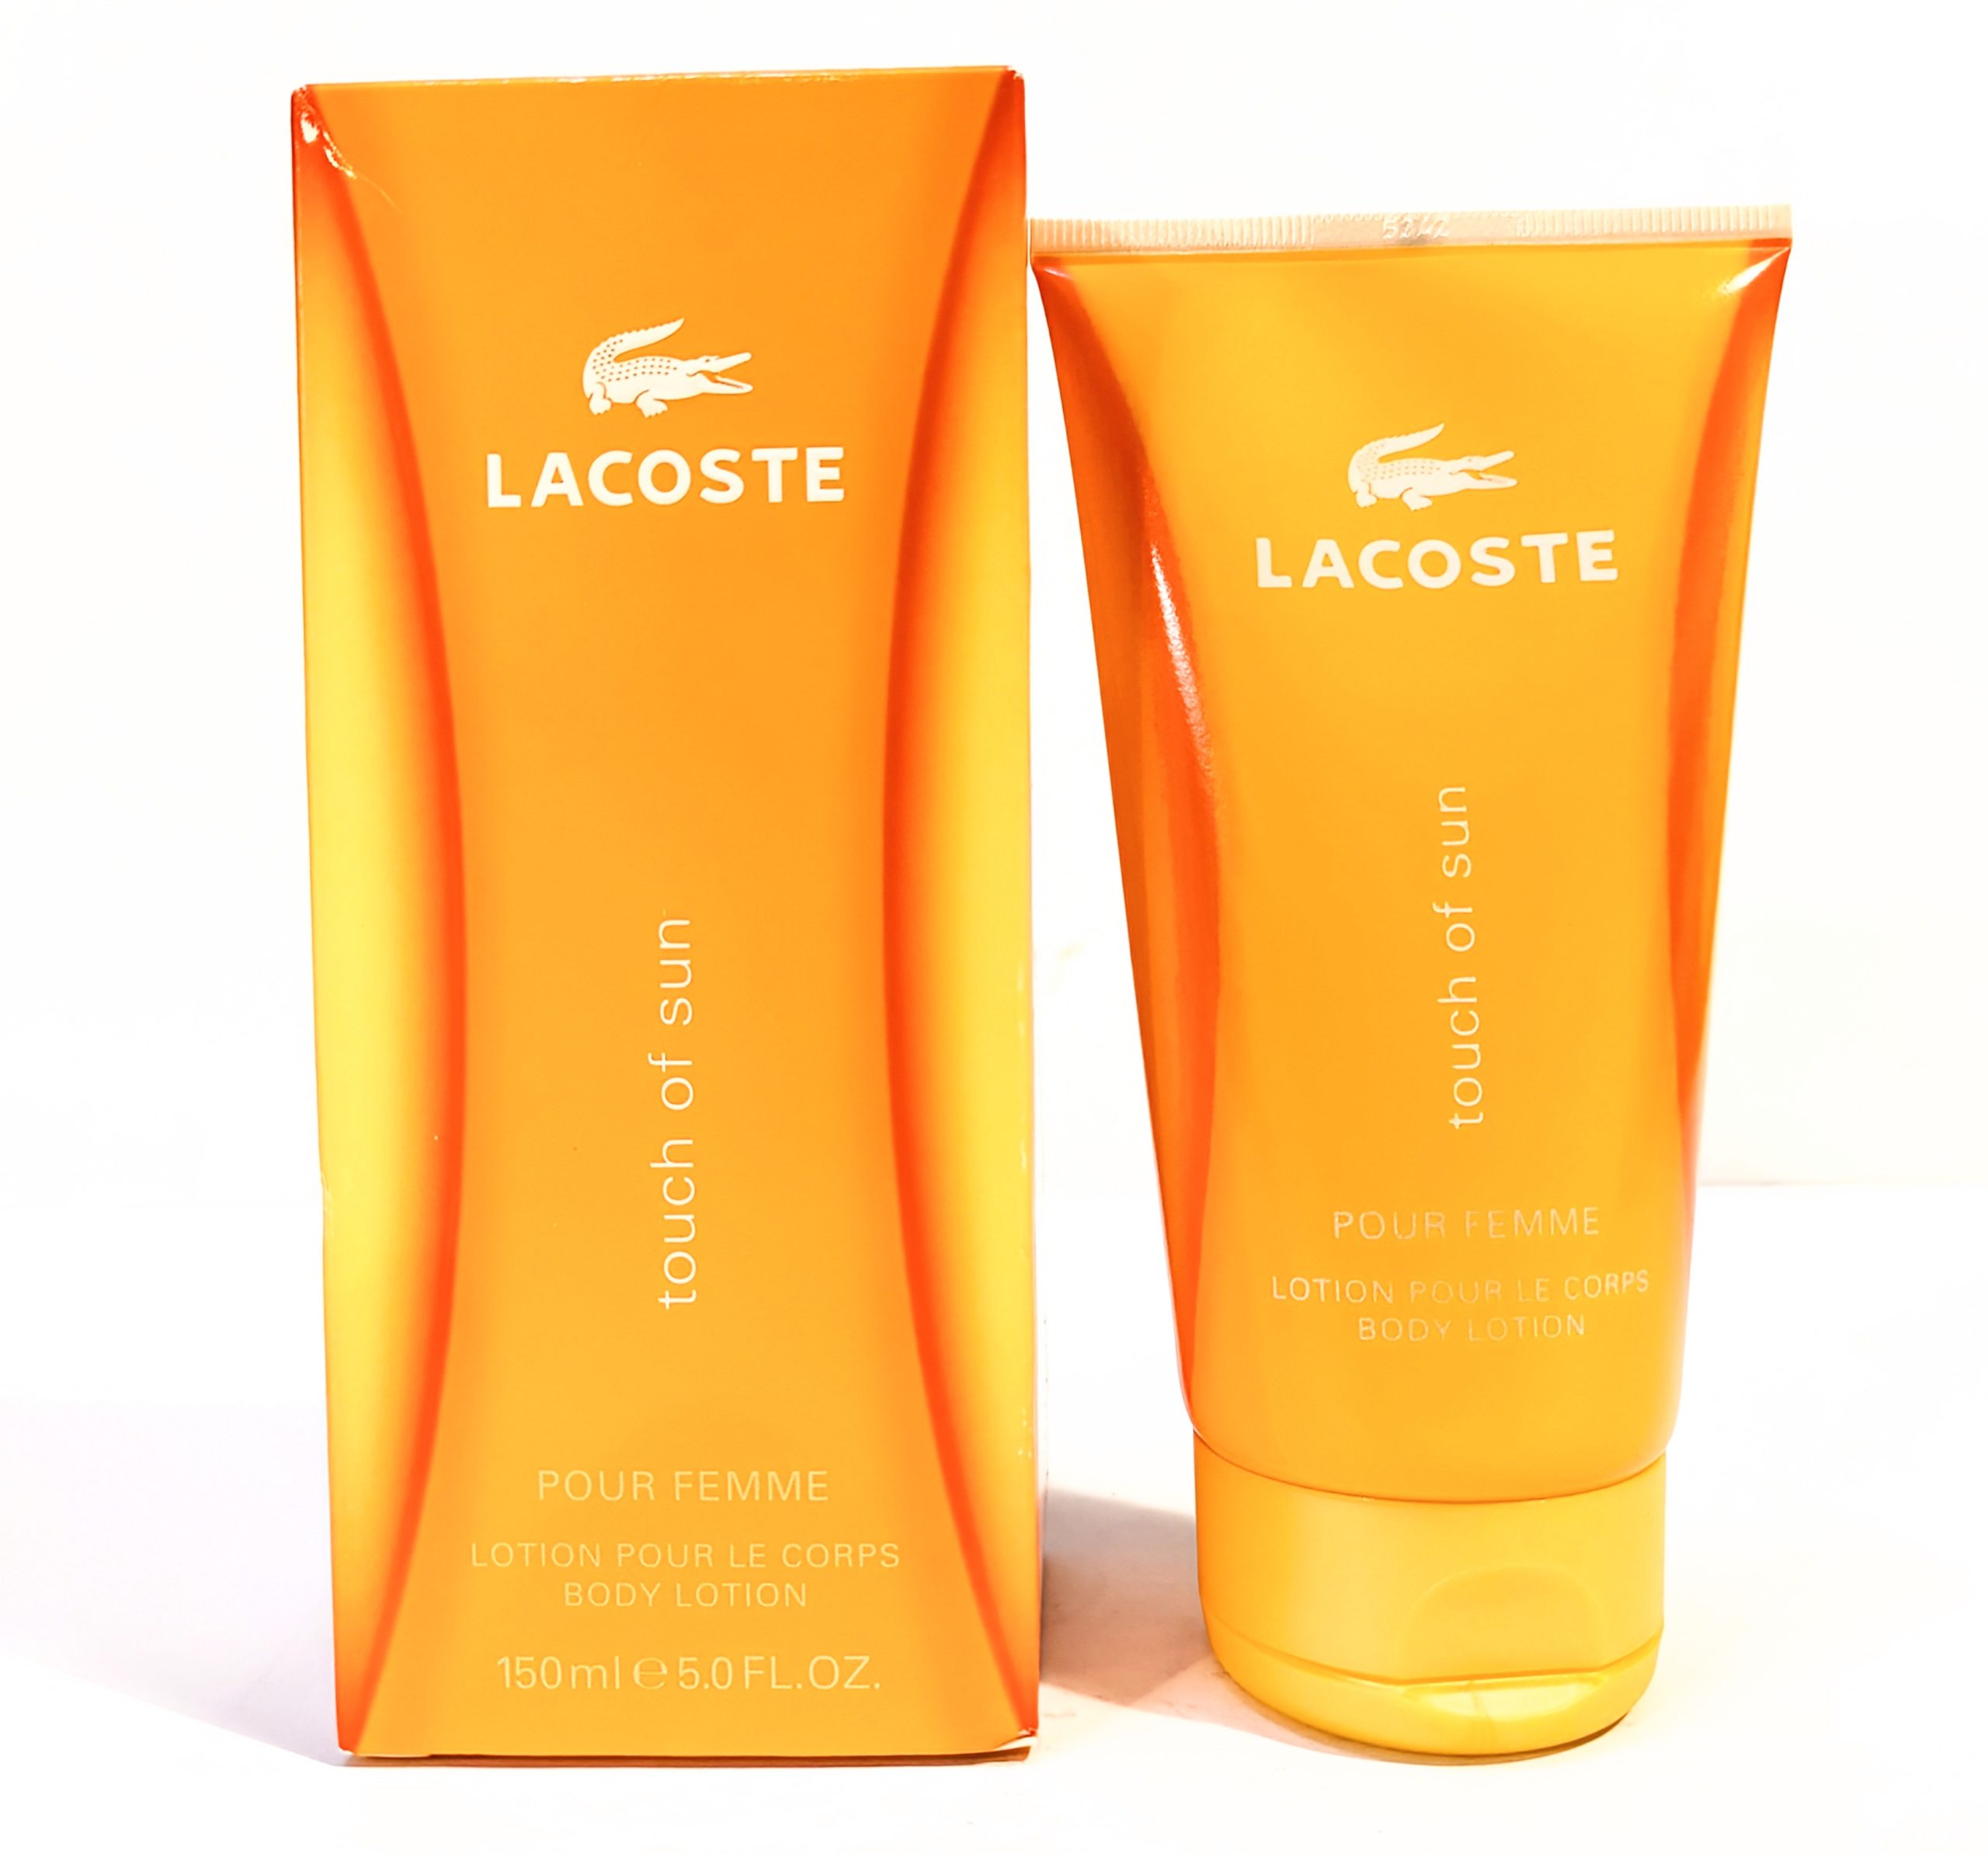 Lacoste “Touch of Sun” body lotion for women. The packaging includes an orange box and tube, each labeled with product details.